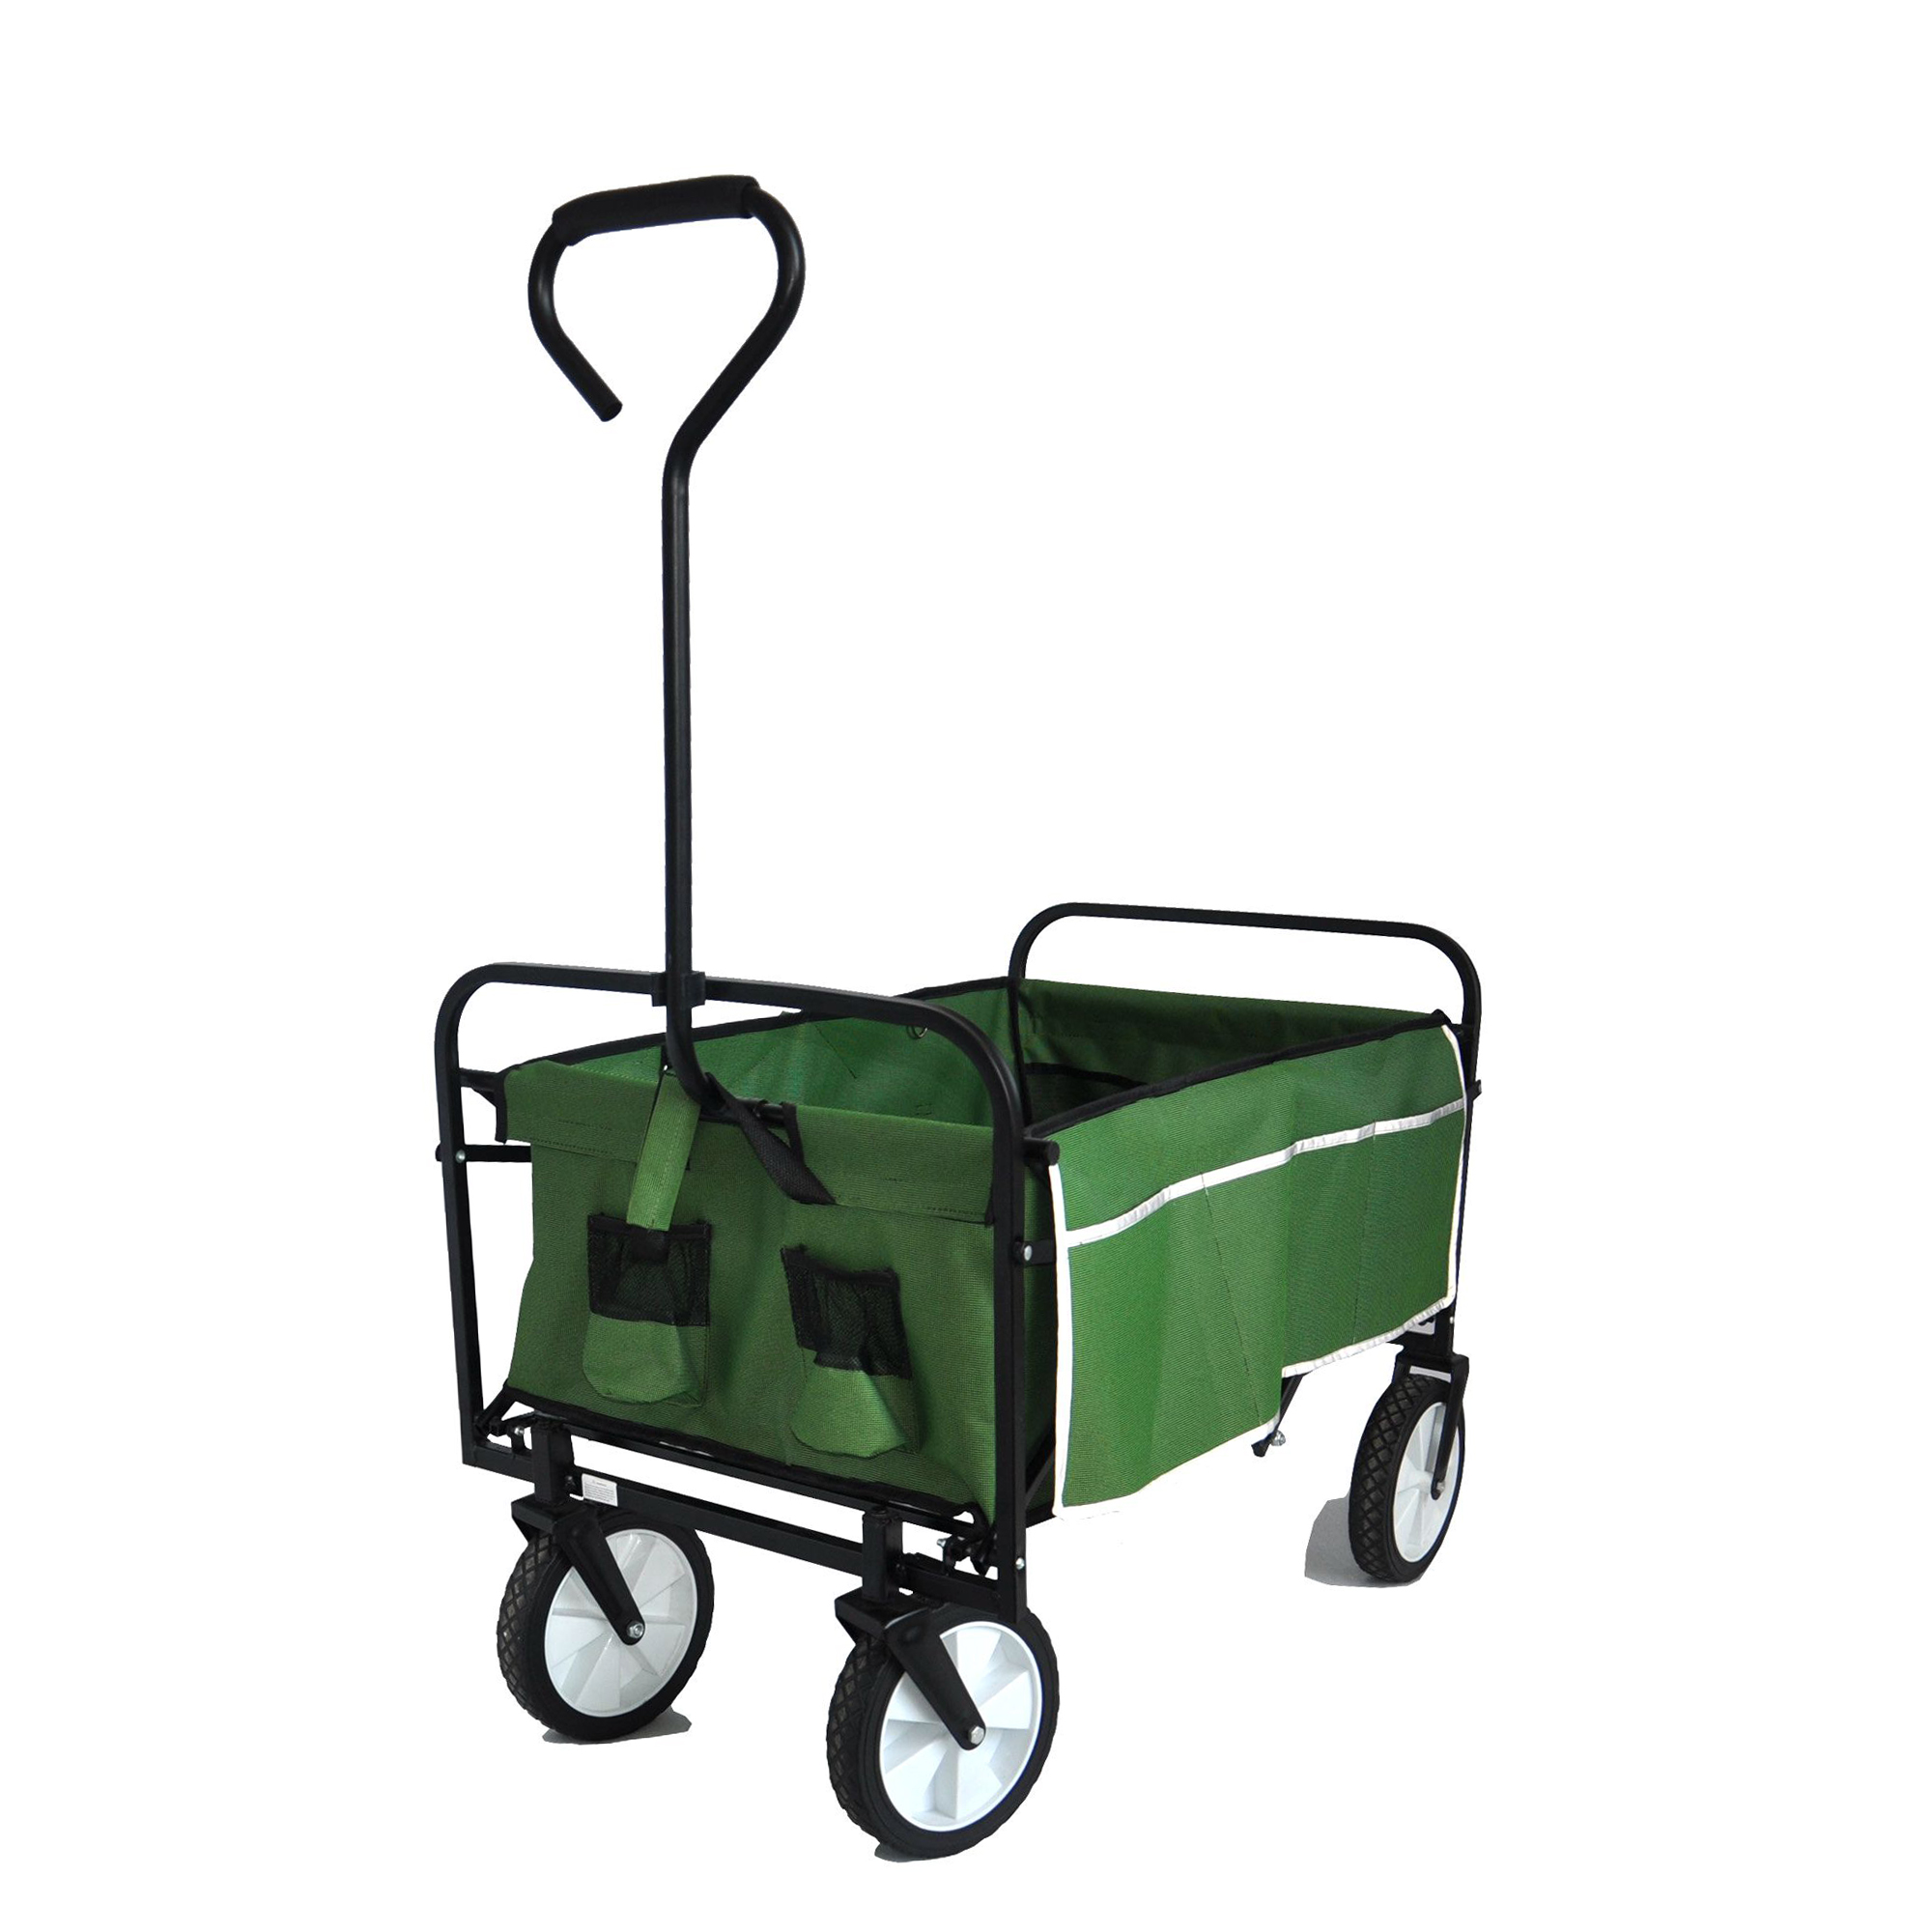 Beach Wagons with Big Wheels for Sand, Sturdy Steel Frame Collapsible Wagon, Foldable Wagon, Grocery Wagon with 3 Side Storage Bags, 2 Mesh Cup Holders, Elastic Rope, Adjustable Handle, Green, Q3808 - image 2 of 12